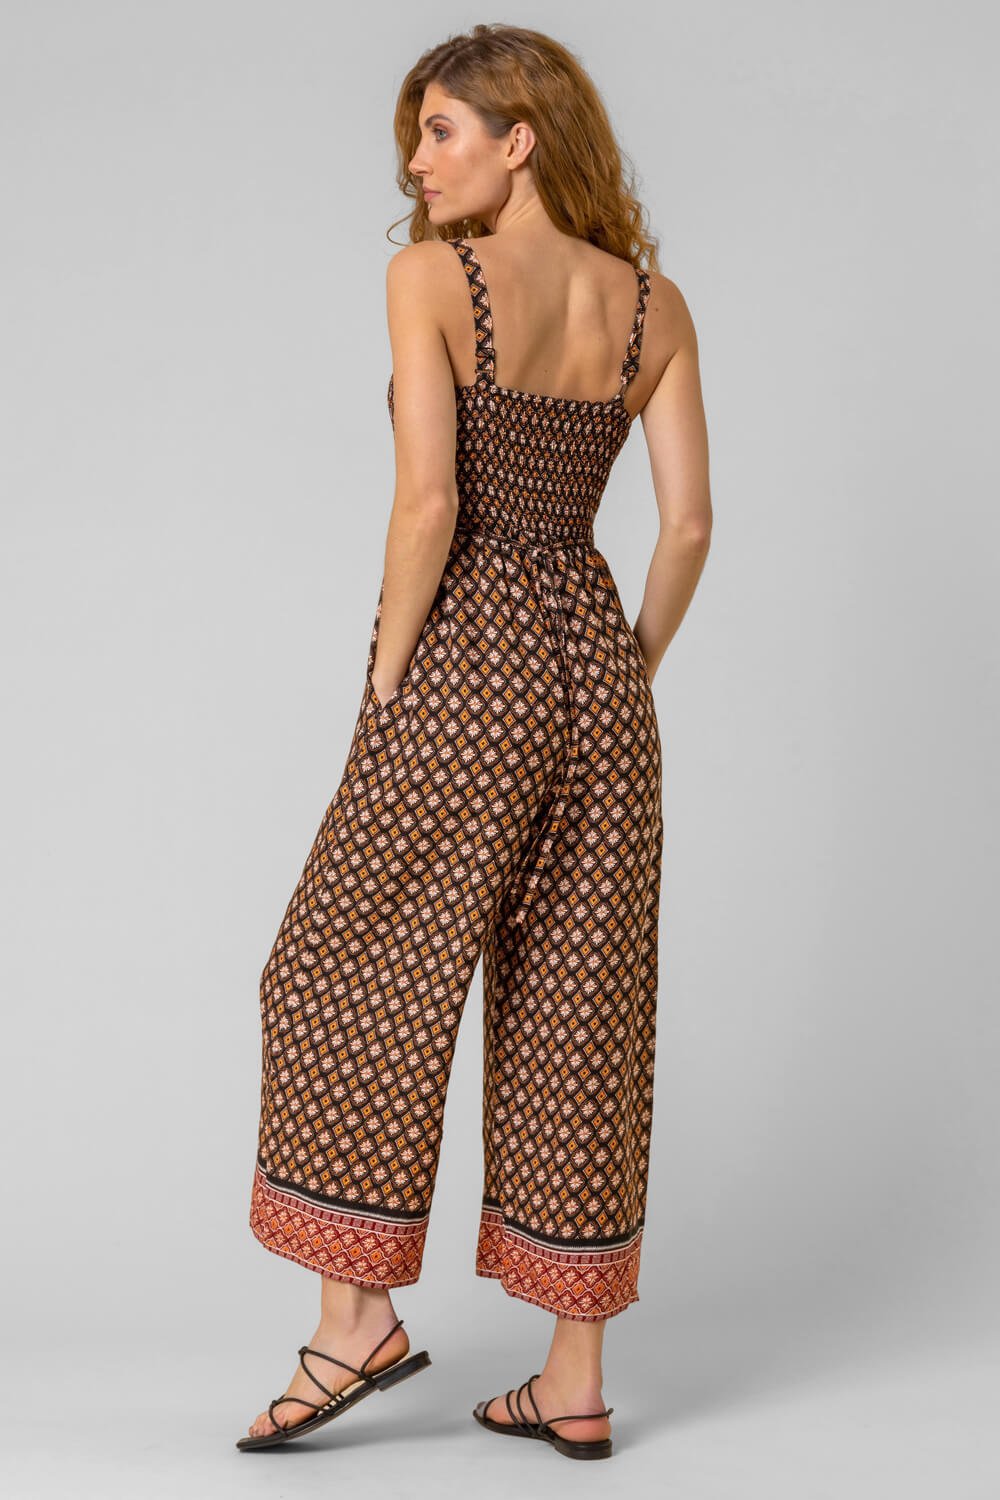 Brown Contrast Geo Print Belted Jumpsuit, Image 2 of 5